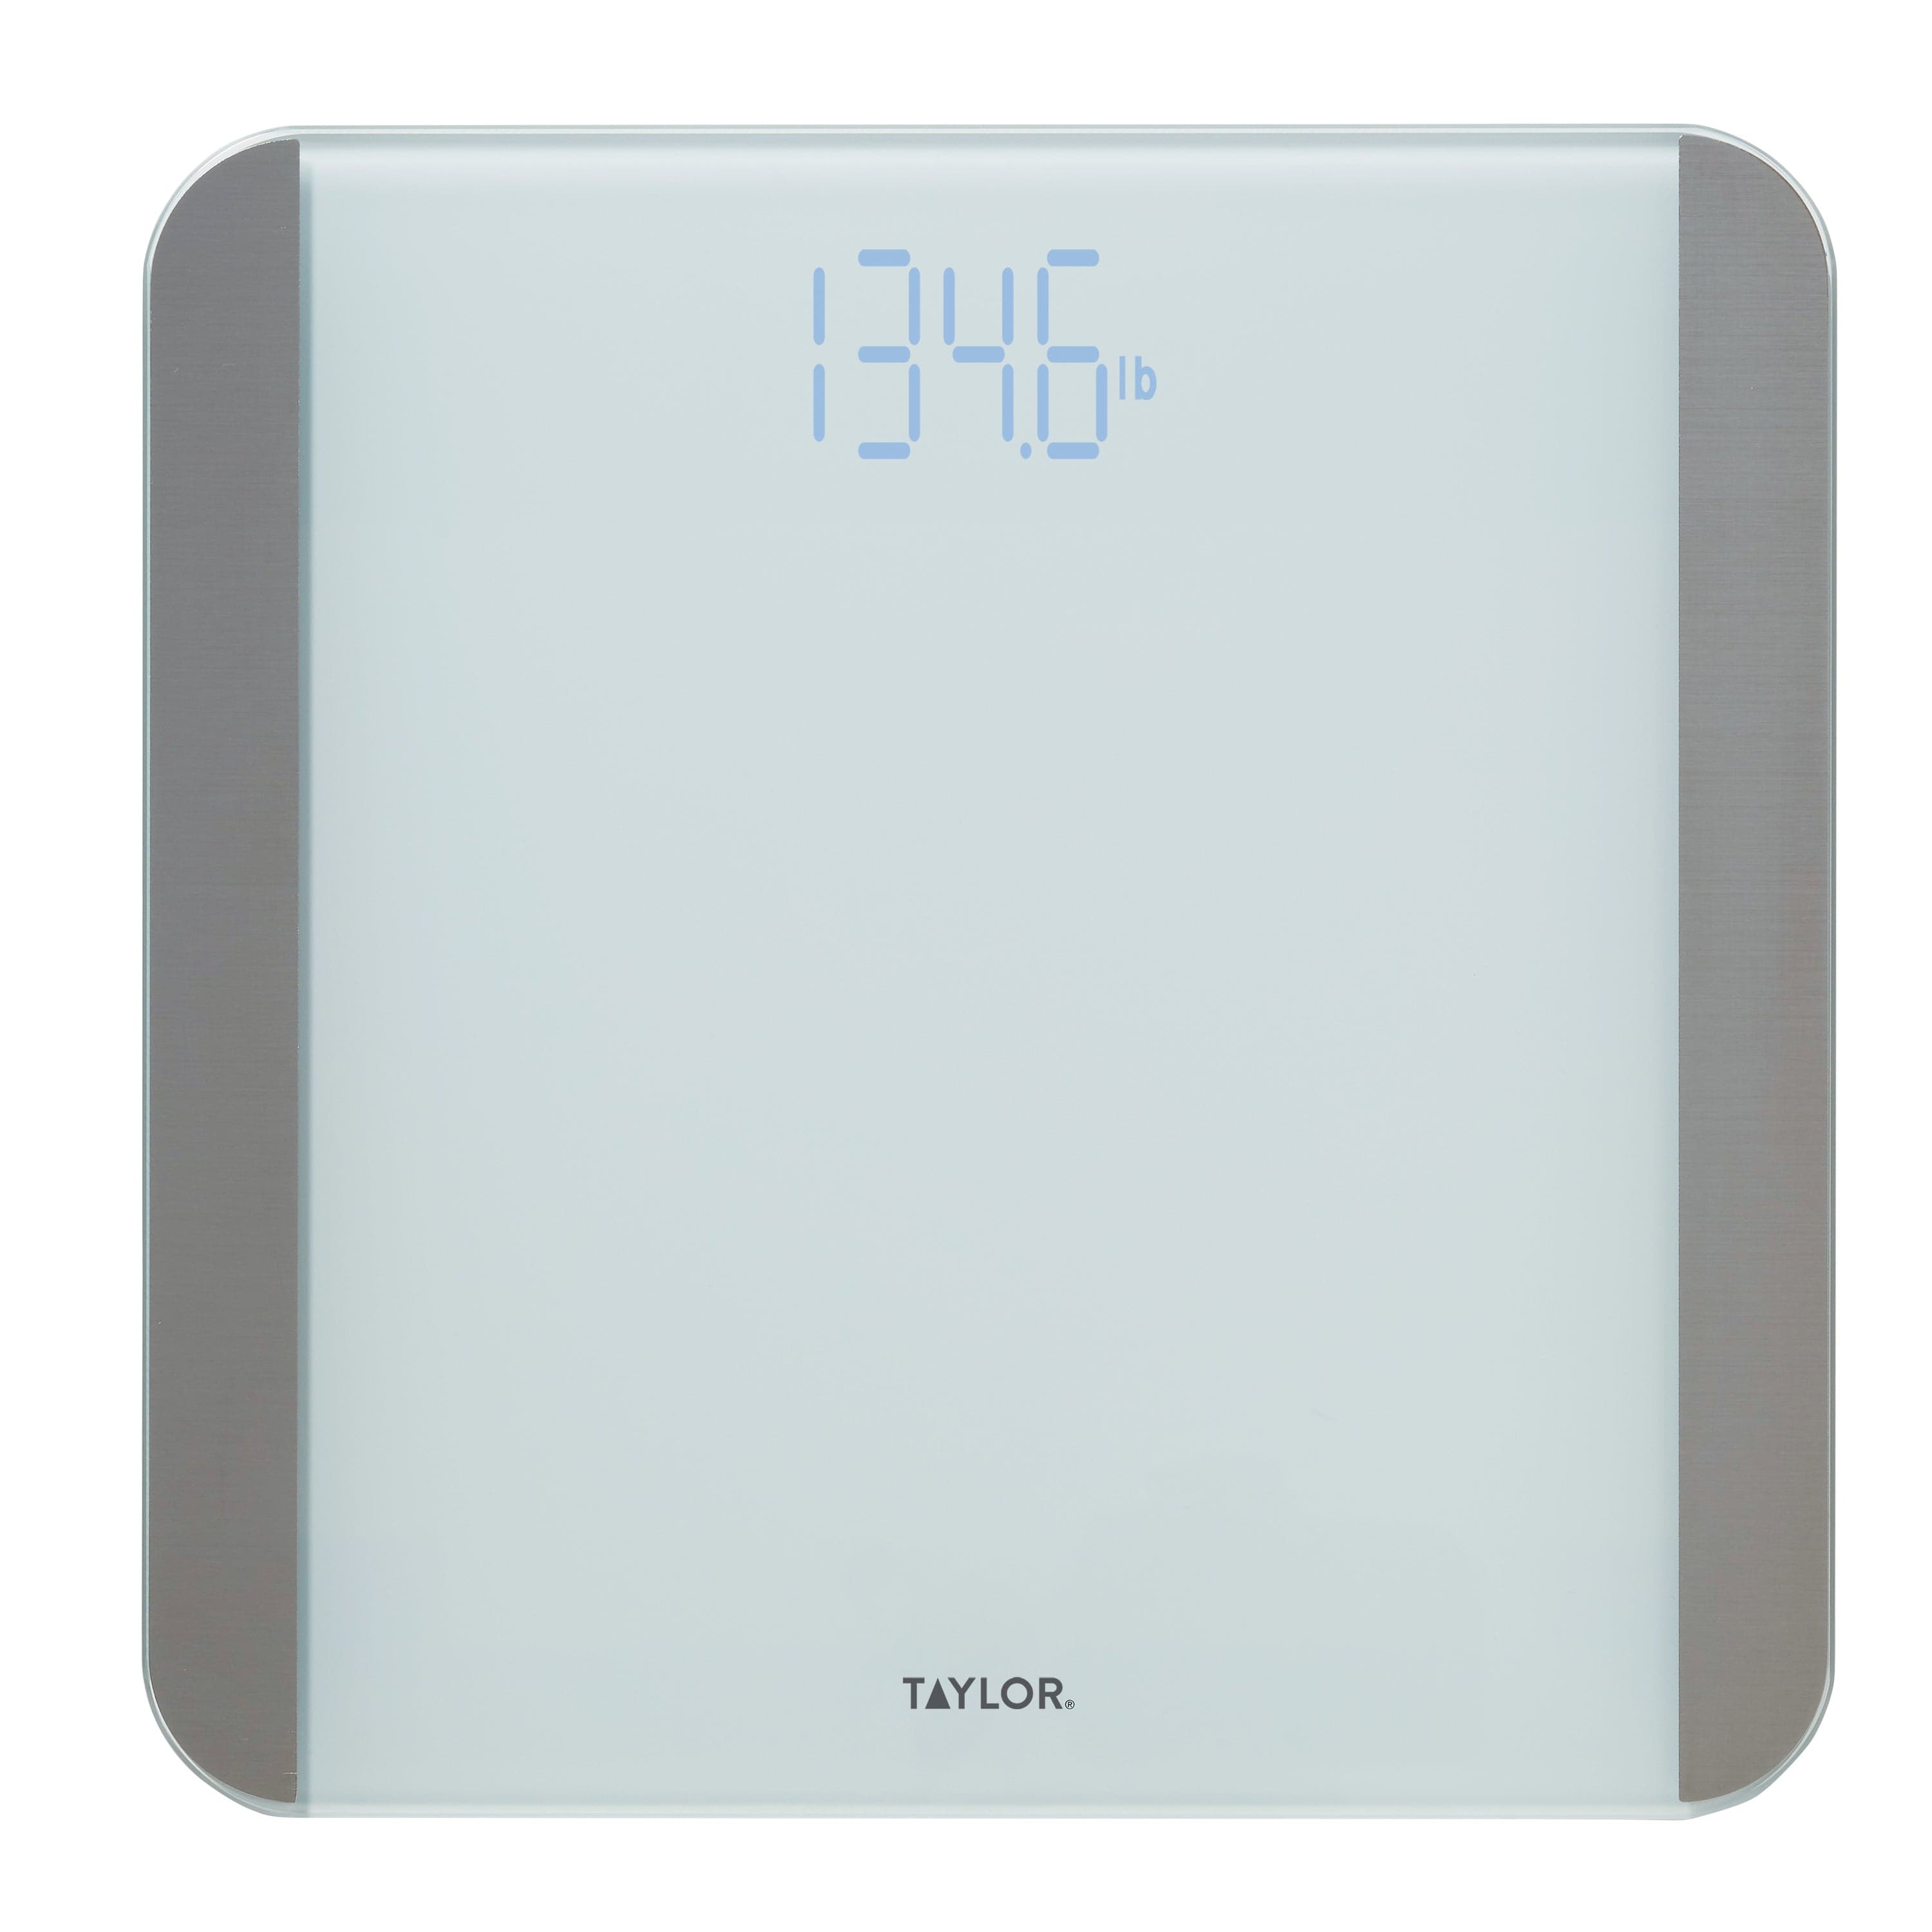 Taylor Everyday Glass Bath Scale - Shop Thermometers & Monitors at